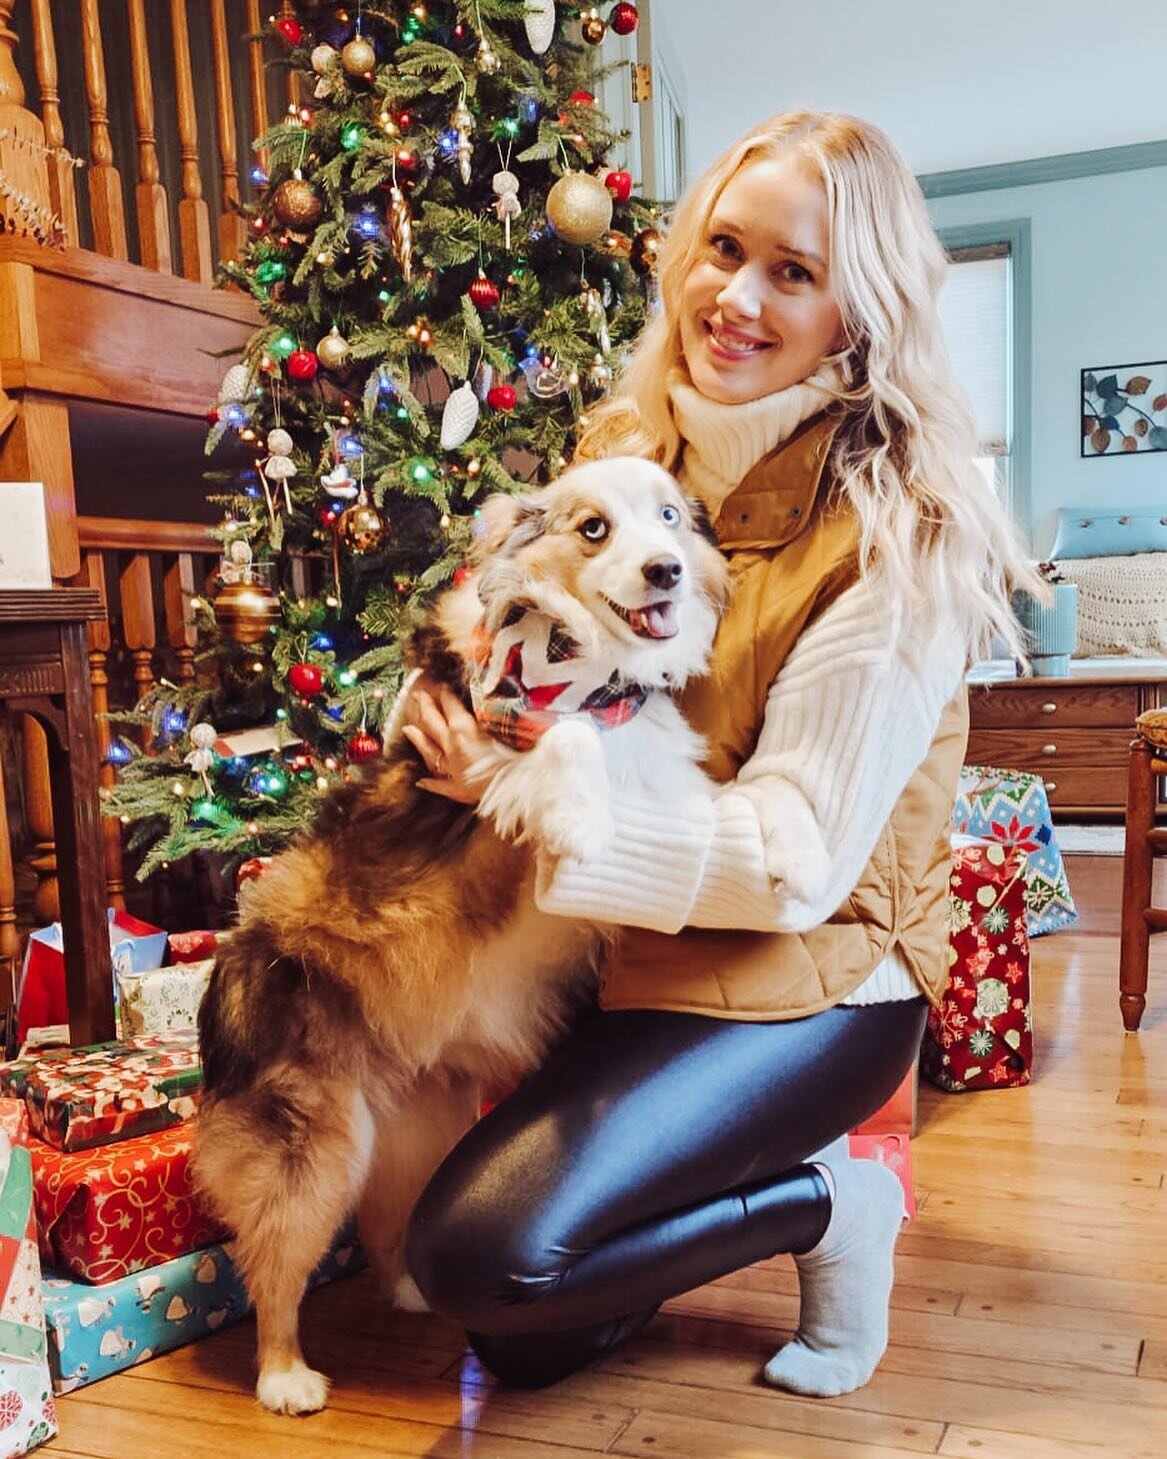 Merry Christmas!🎄 We are so grateful for your support this year. We met so many wonderful people and pups, you&rsquo;re the reason we keep doing what we&rsquo;re doing! Have a safe and happy holidays! xx Katie + Maddie